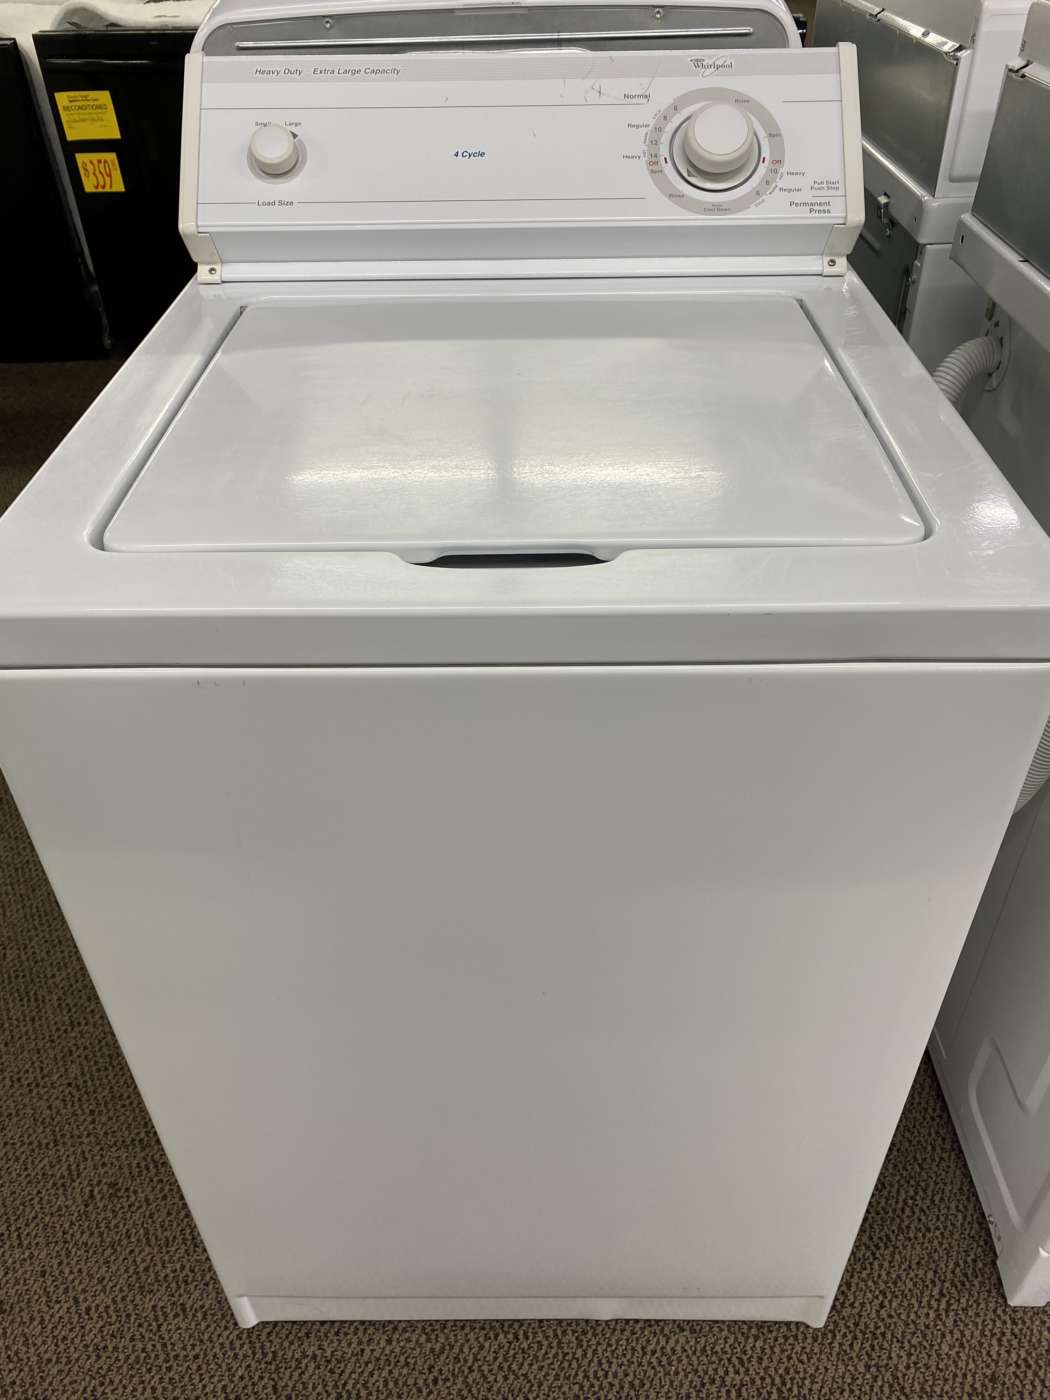 Reconditioned WHIRLPOOL 3.2 Cu. Ft. Top-Load Washer – White